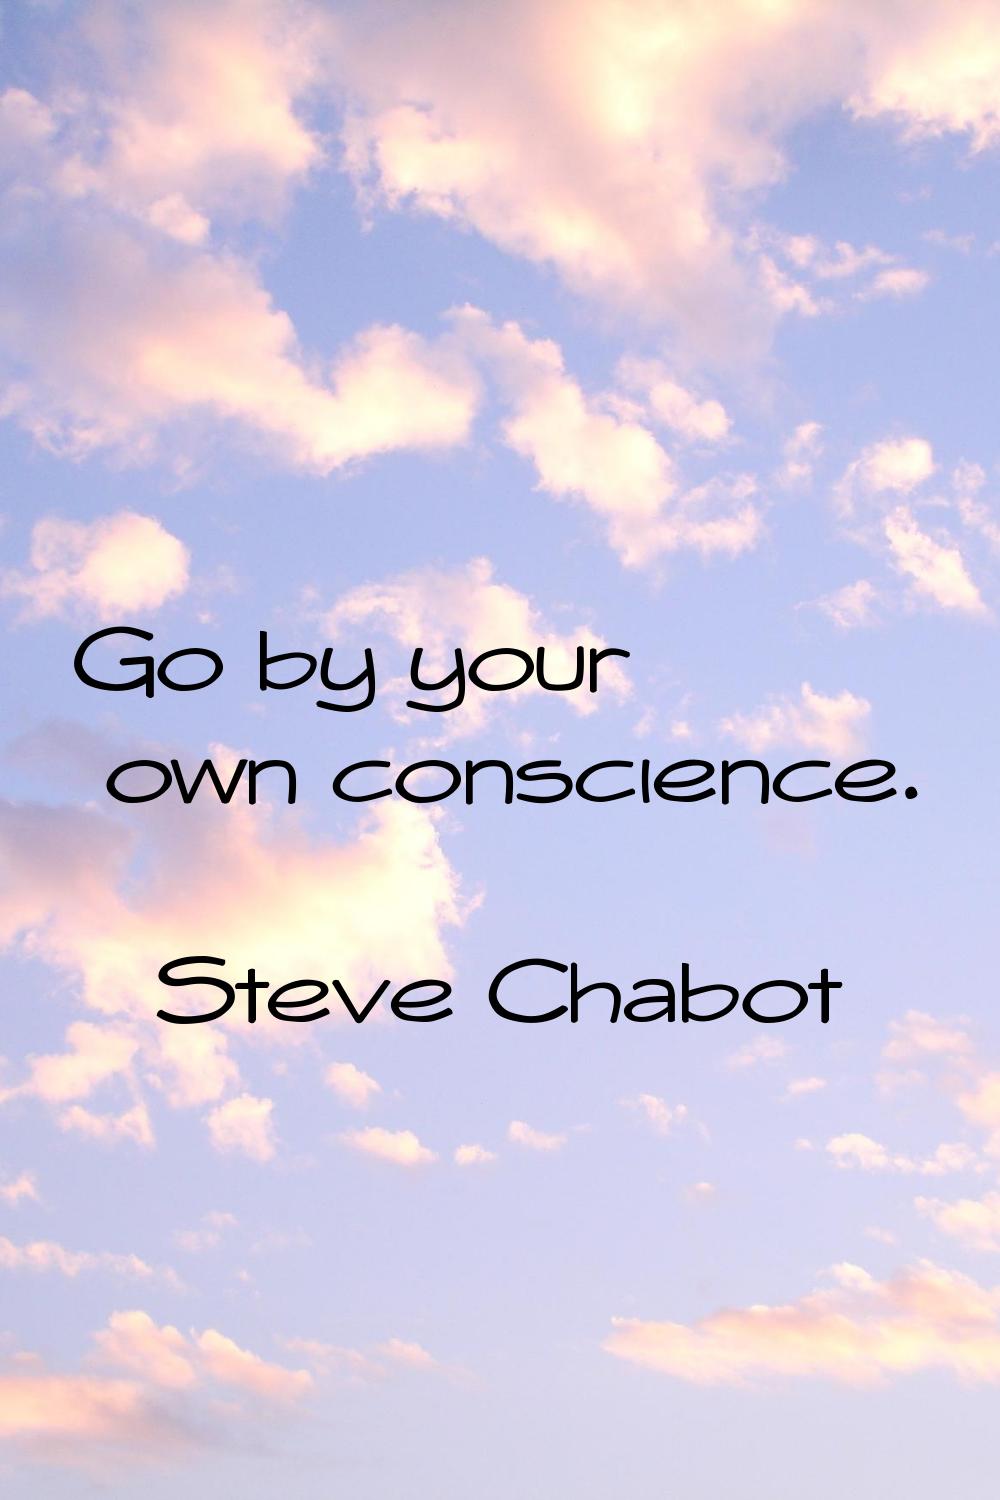 Go by your own conscience.